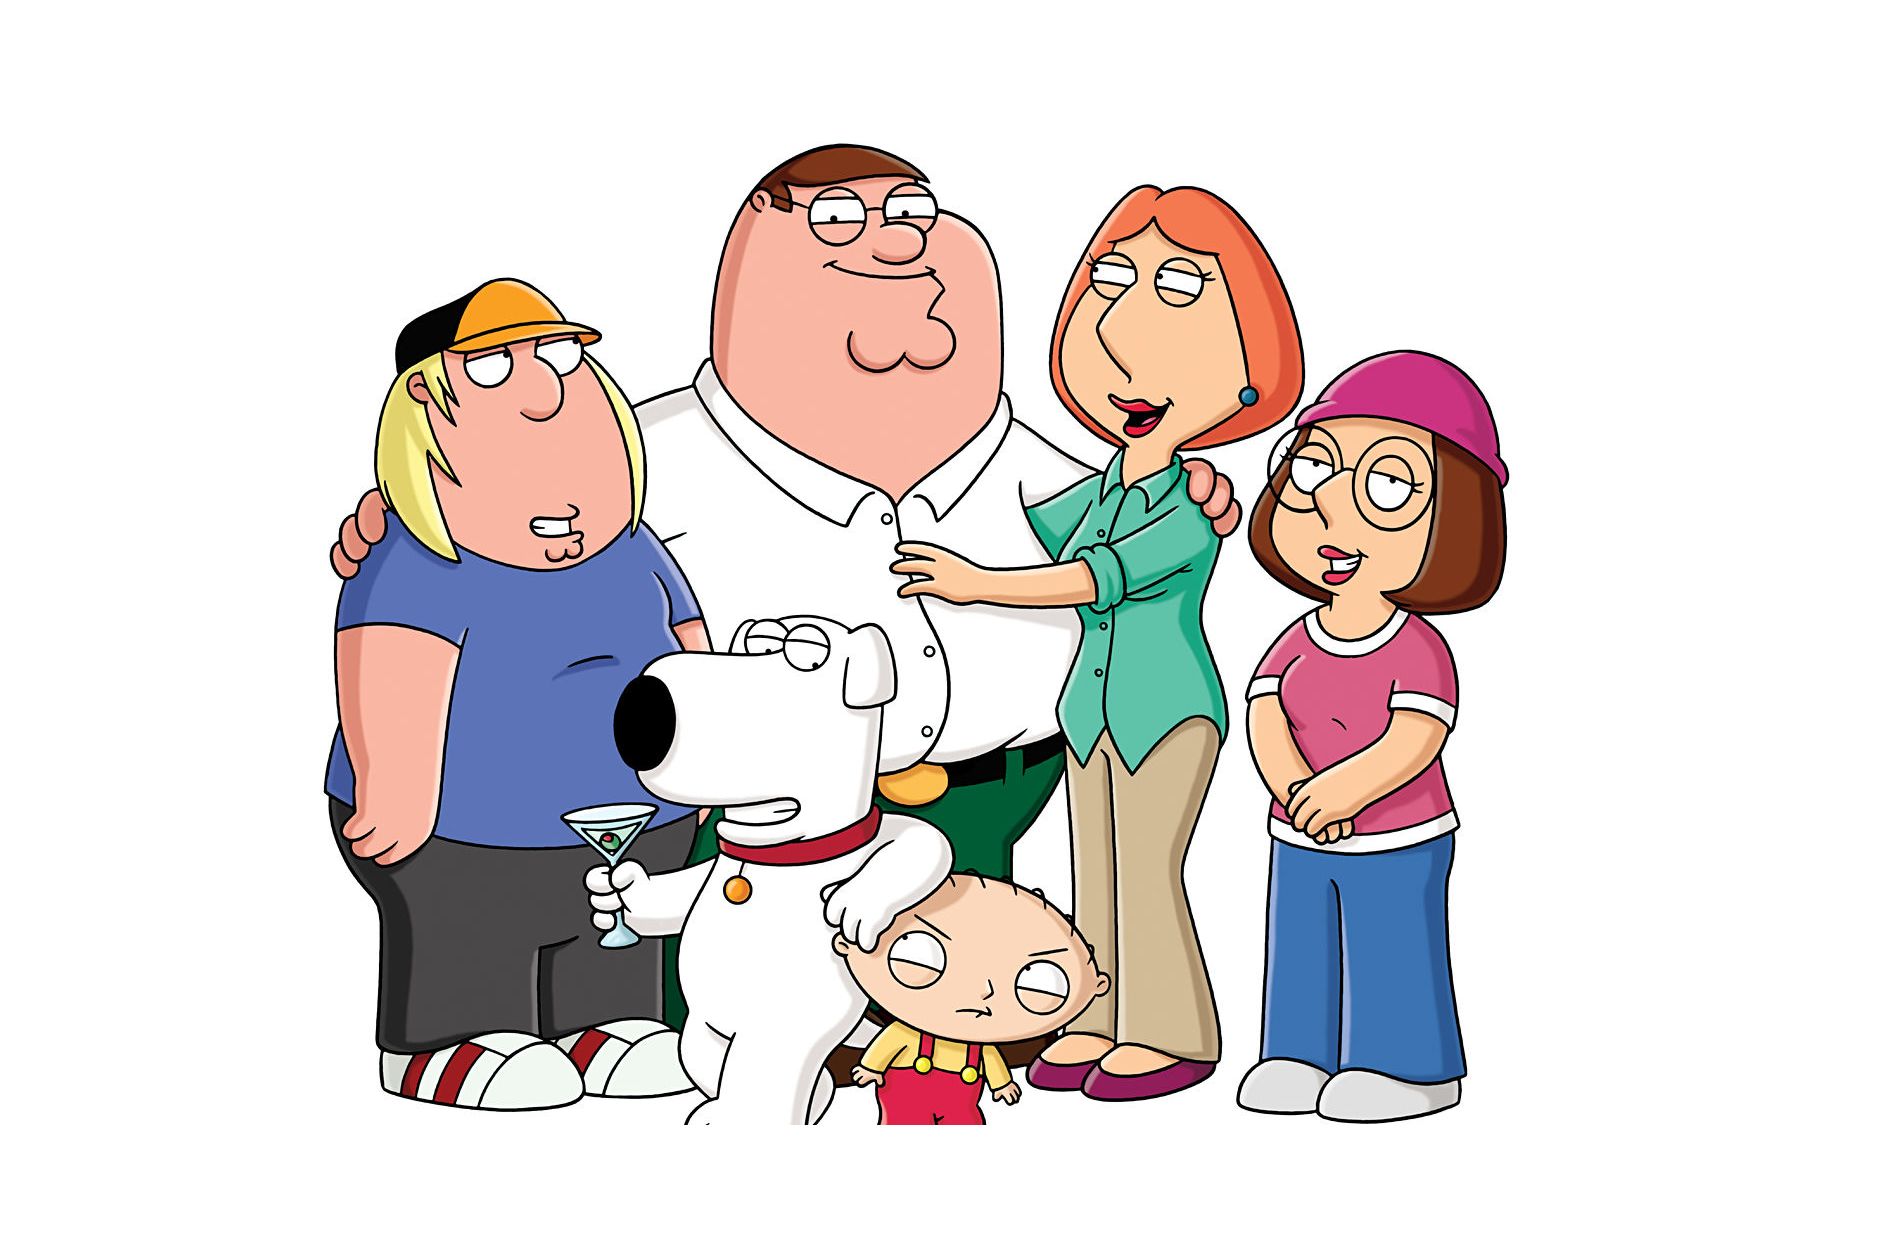 Peter Griffin's Blue Hair in Family Guy - wide 2